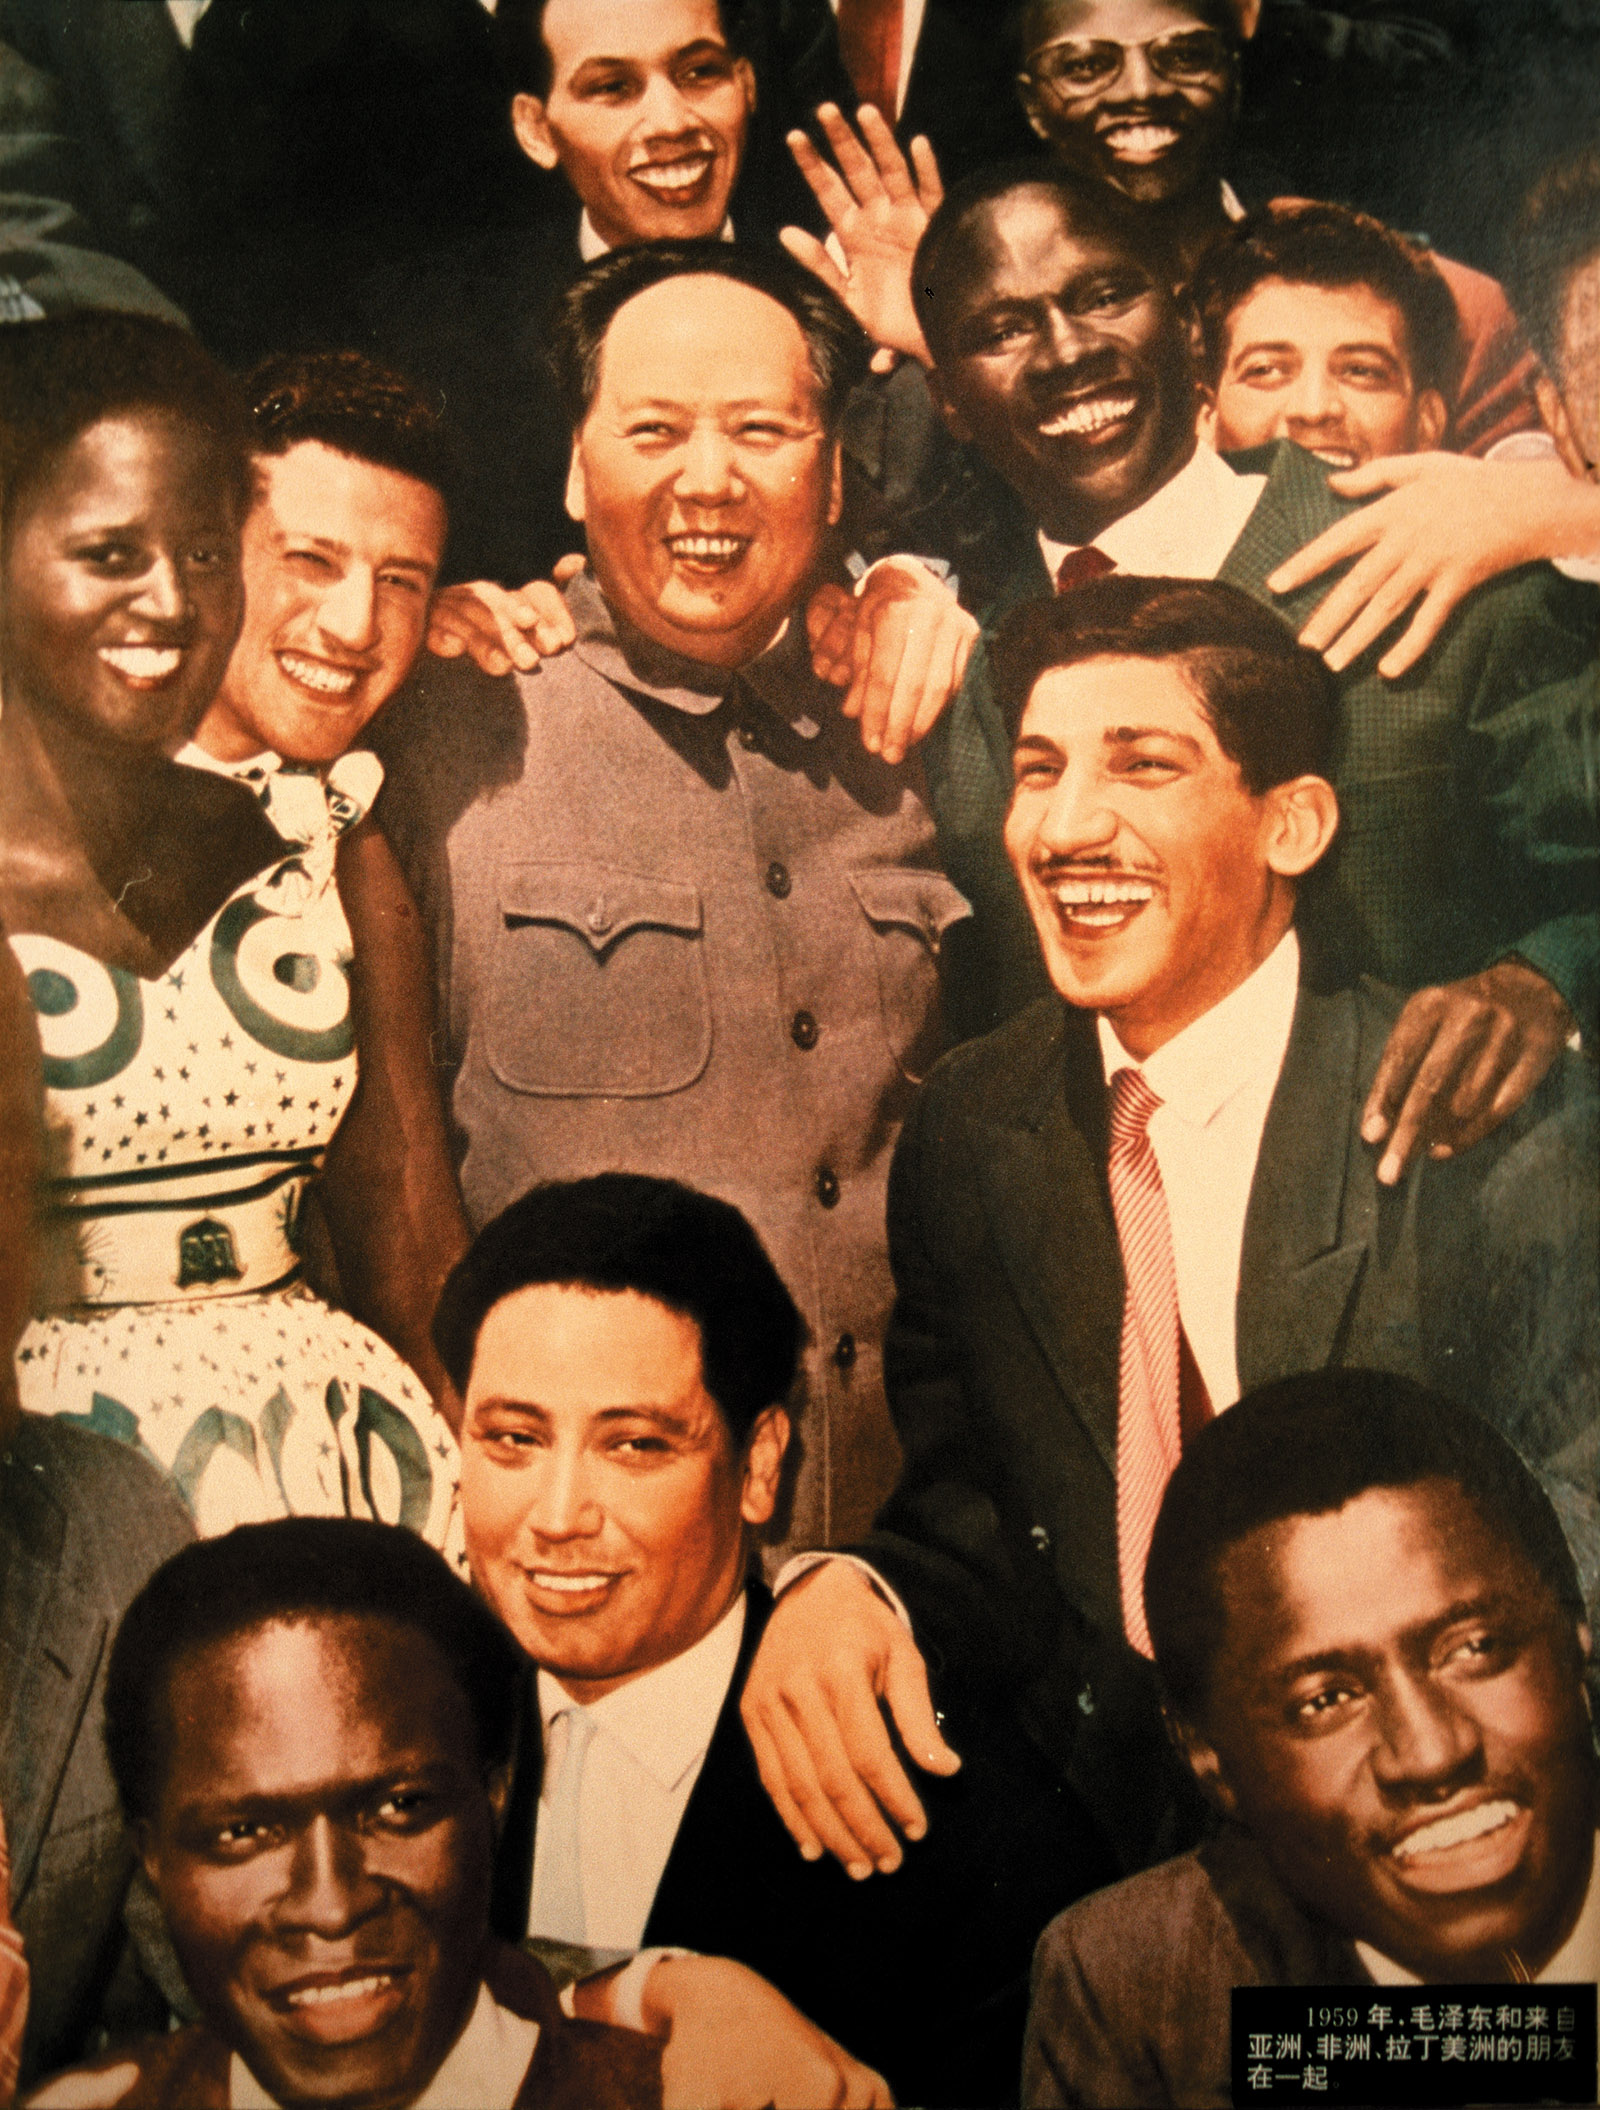 A propaganda photo showing Mao with people from African, Arab, and South American countries, 1959